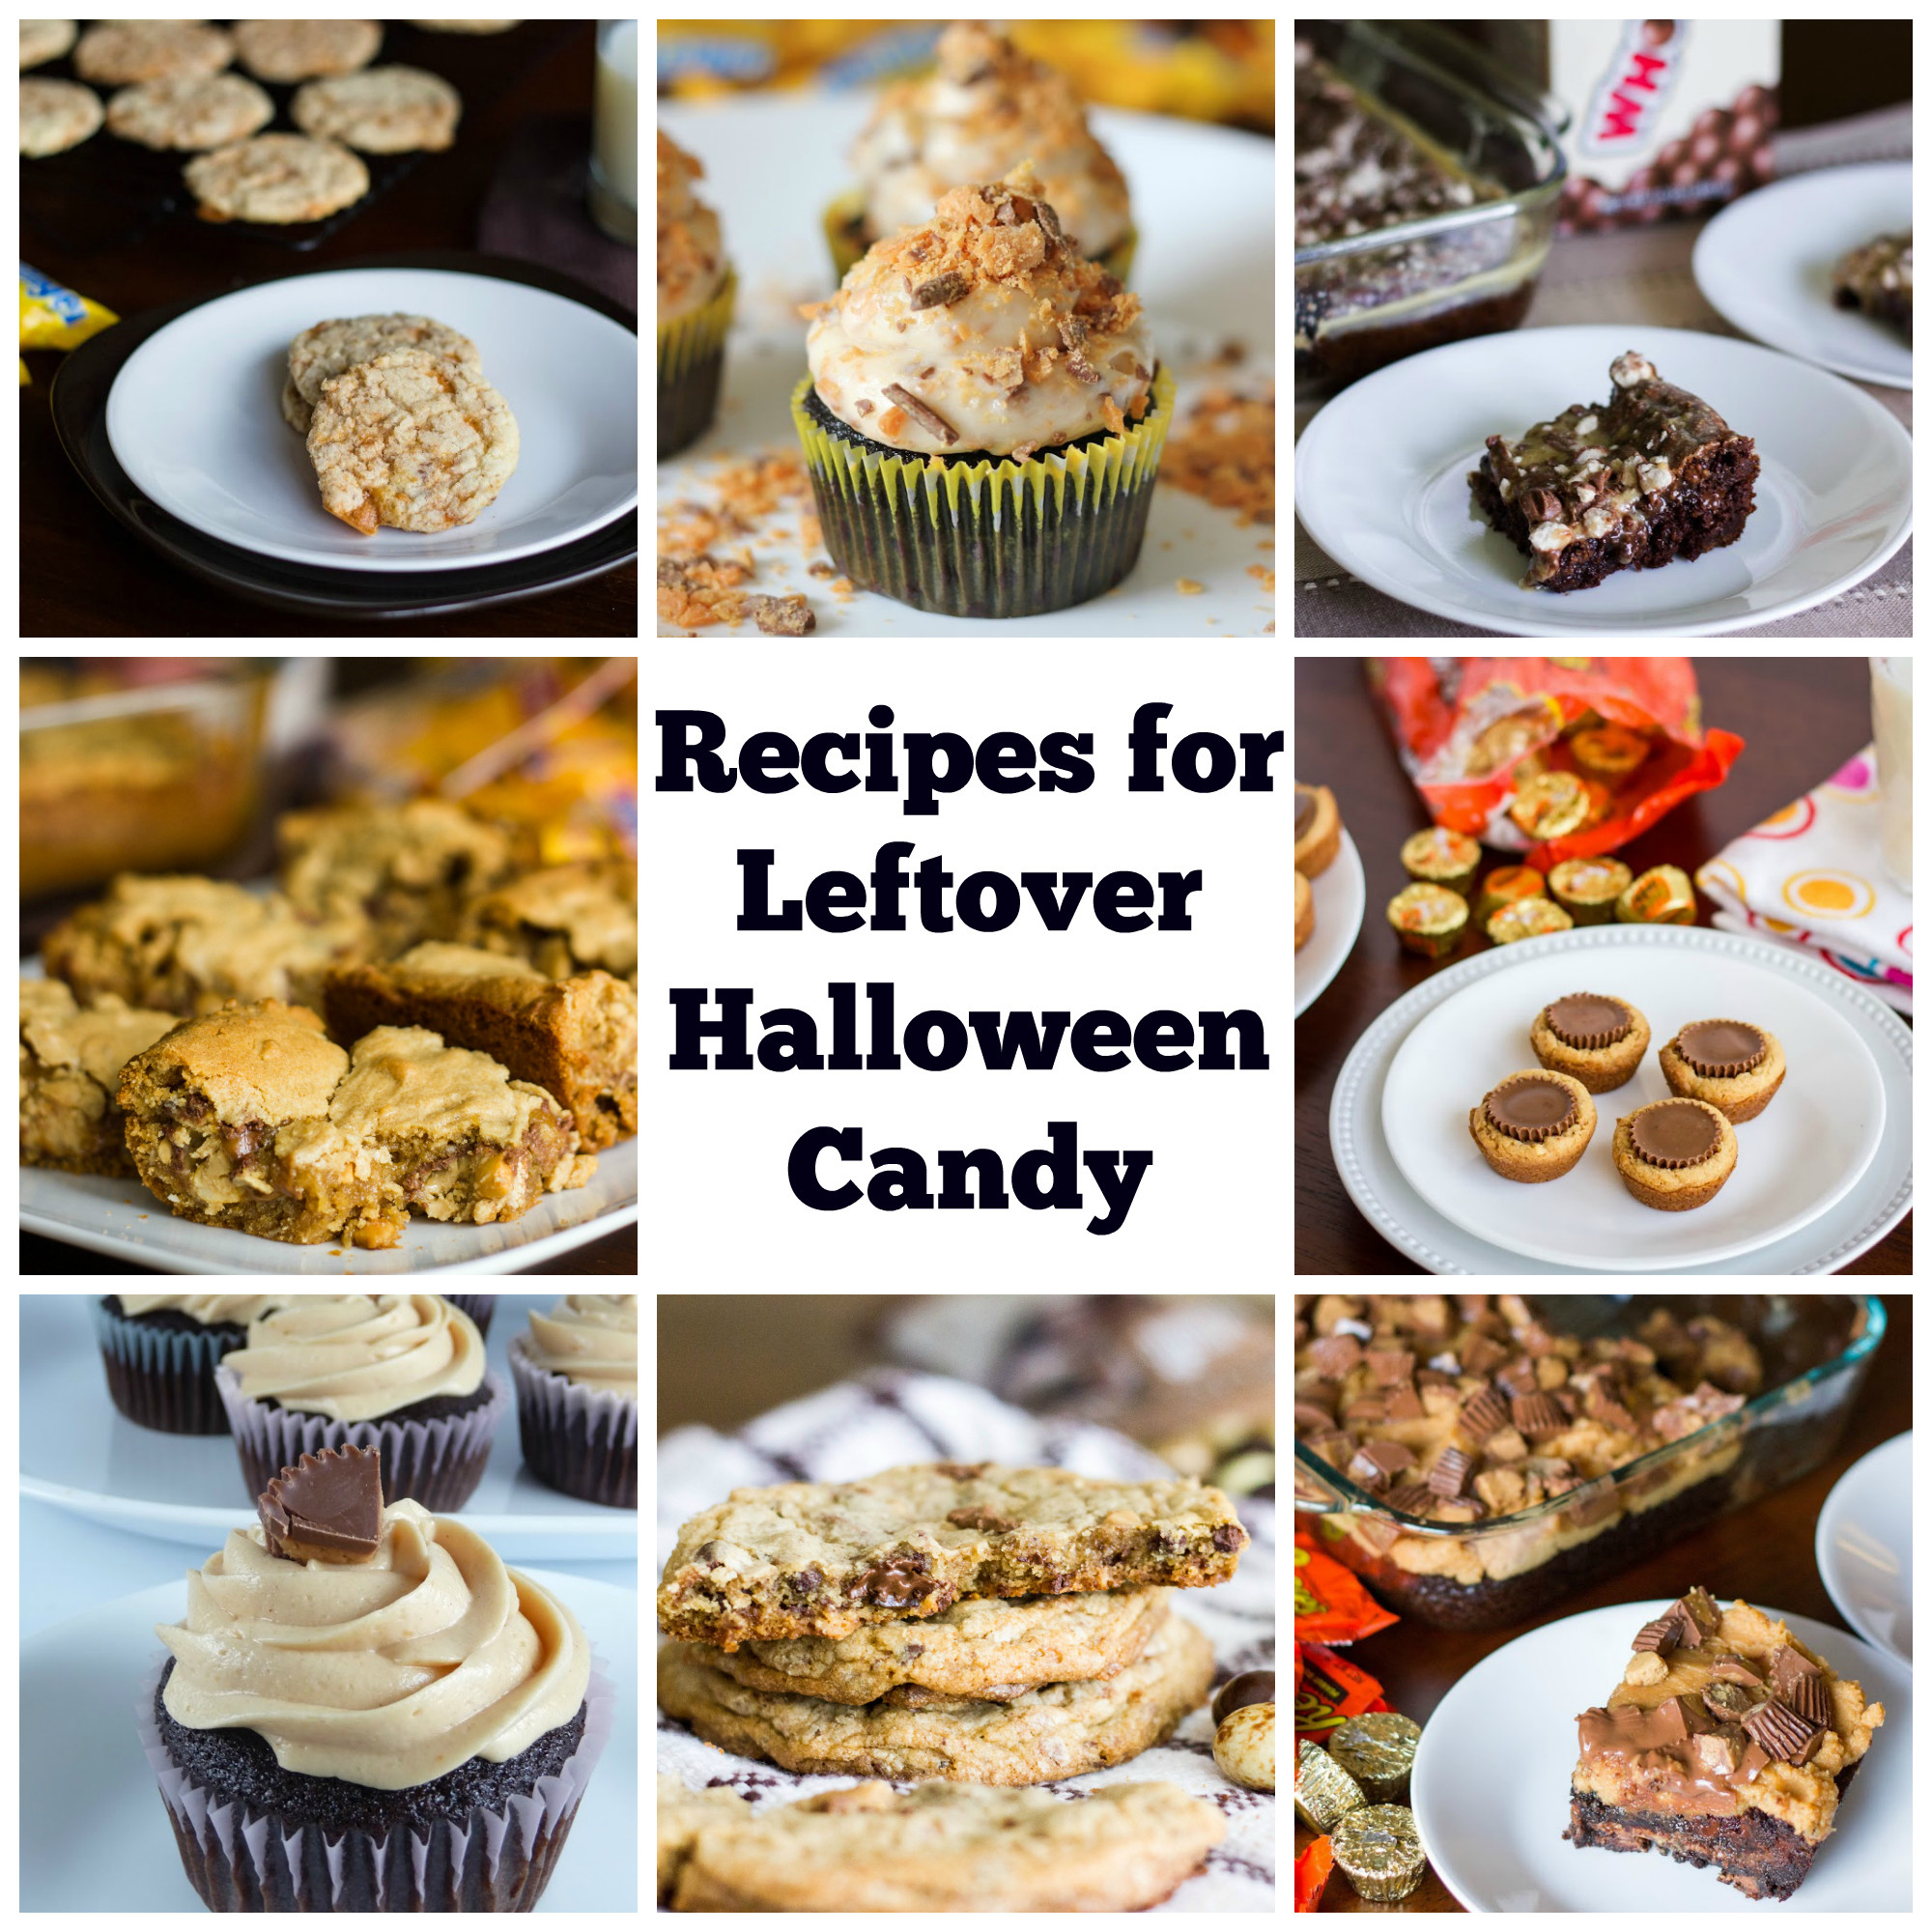 Leftover Halloween Candy Recipes
 Recipes for Leftover Halloween Candy Kendra s Treats